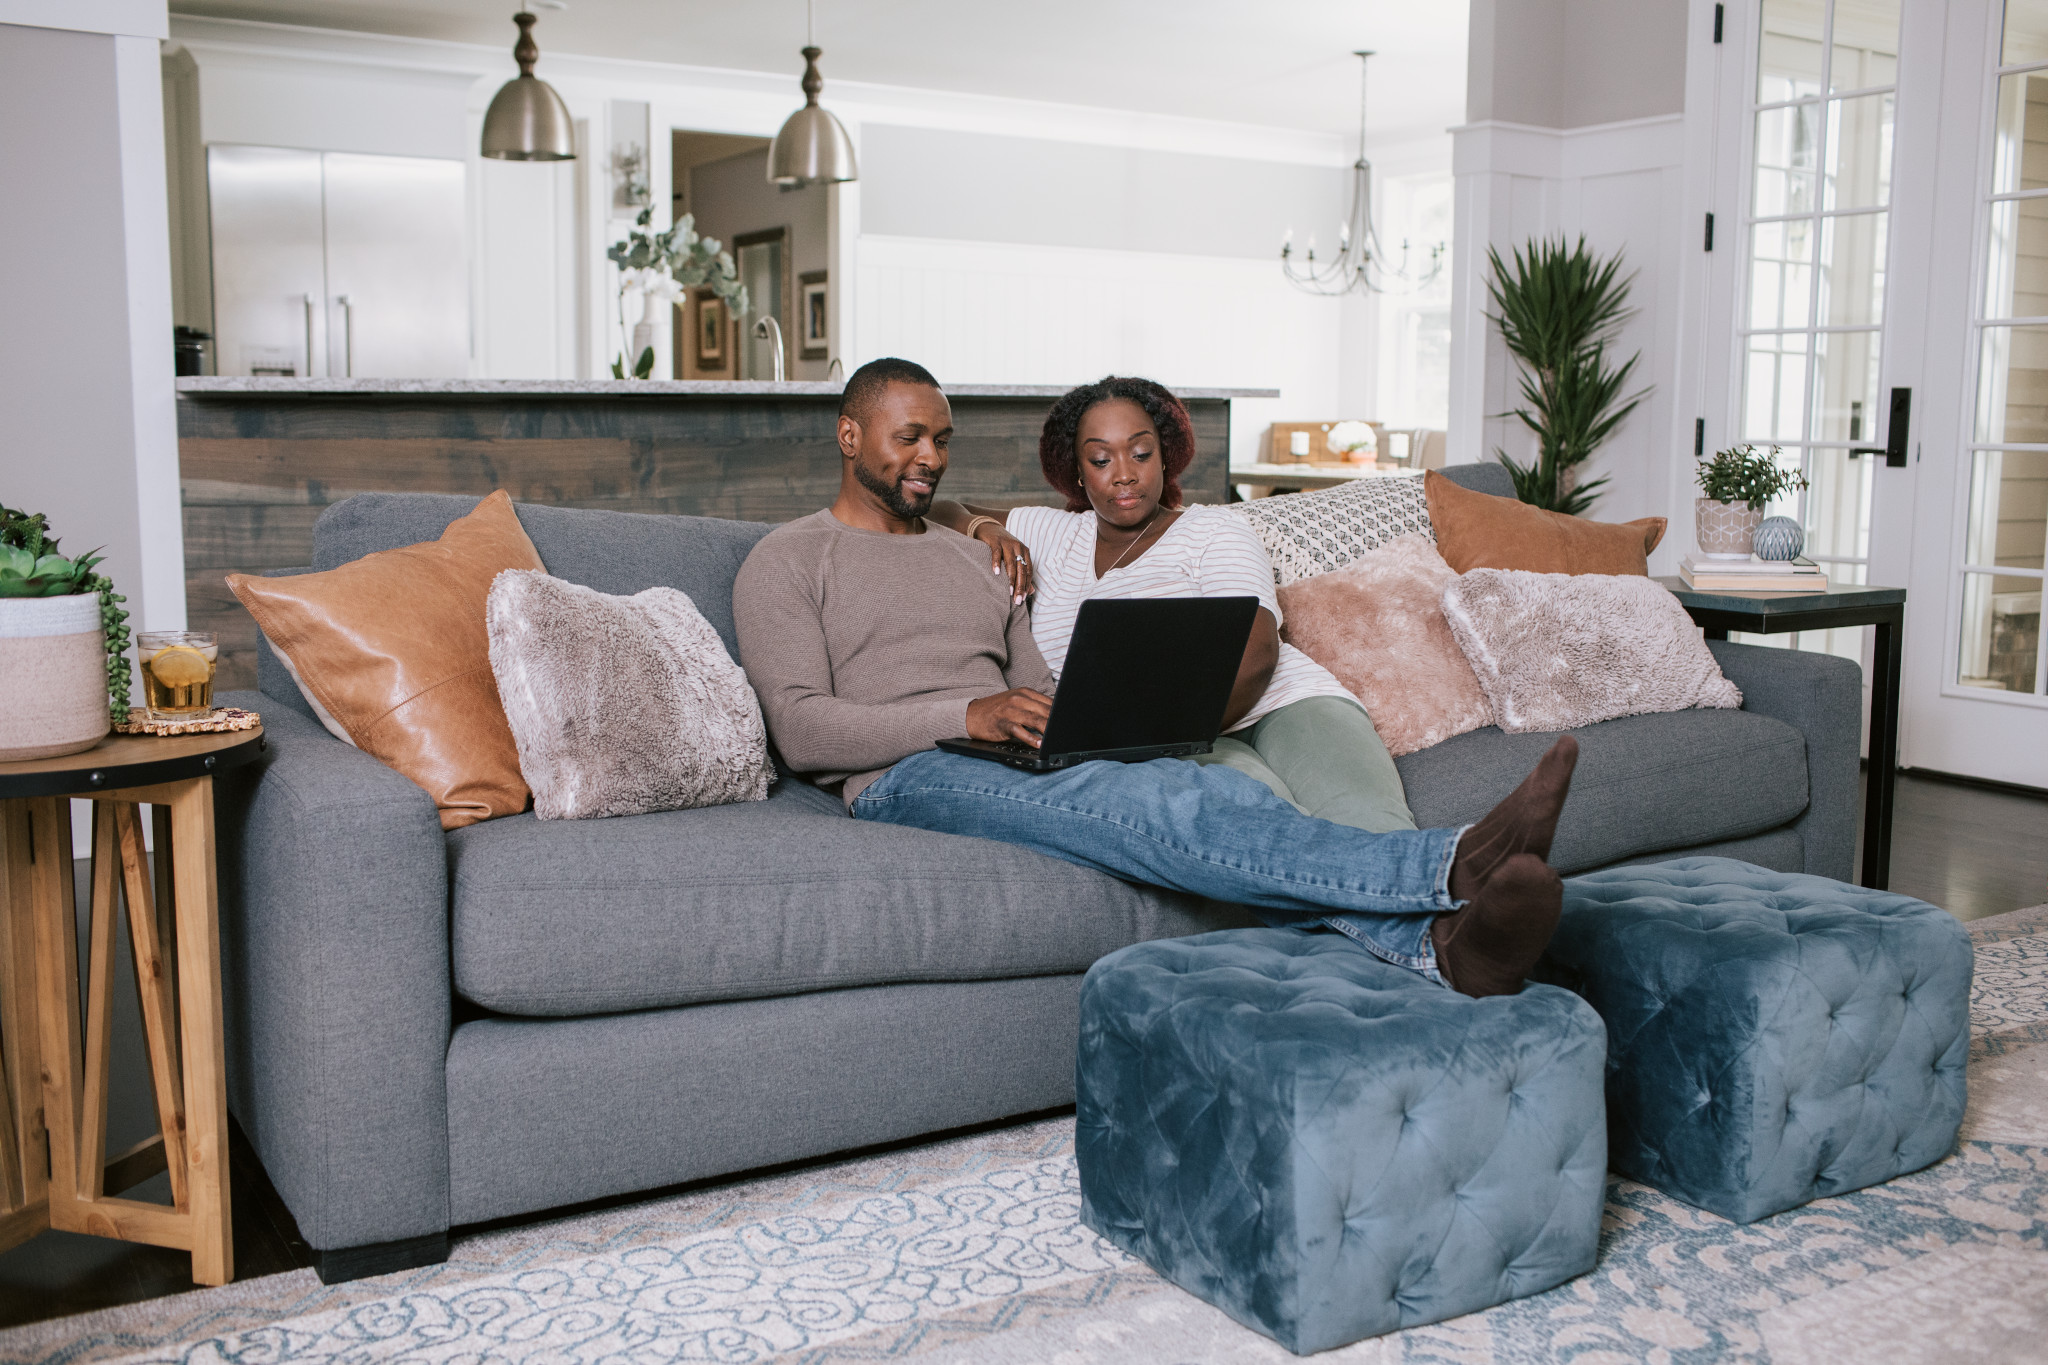 Couple sitting together on a couch, illustrating a couple spending time together in a relaxed setting.